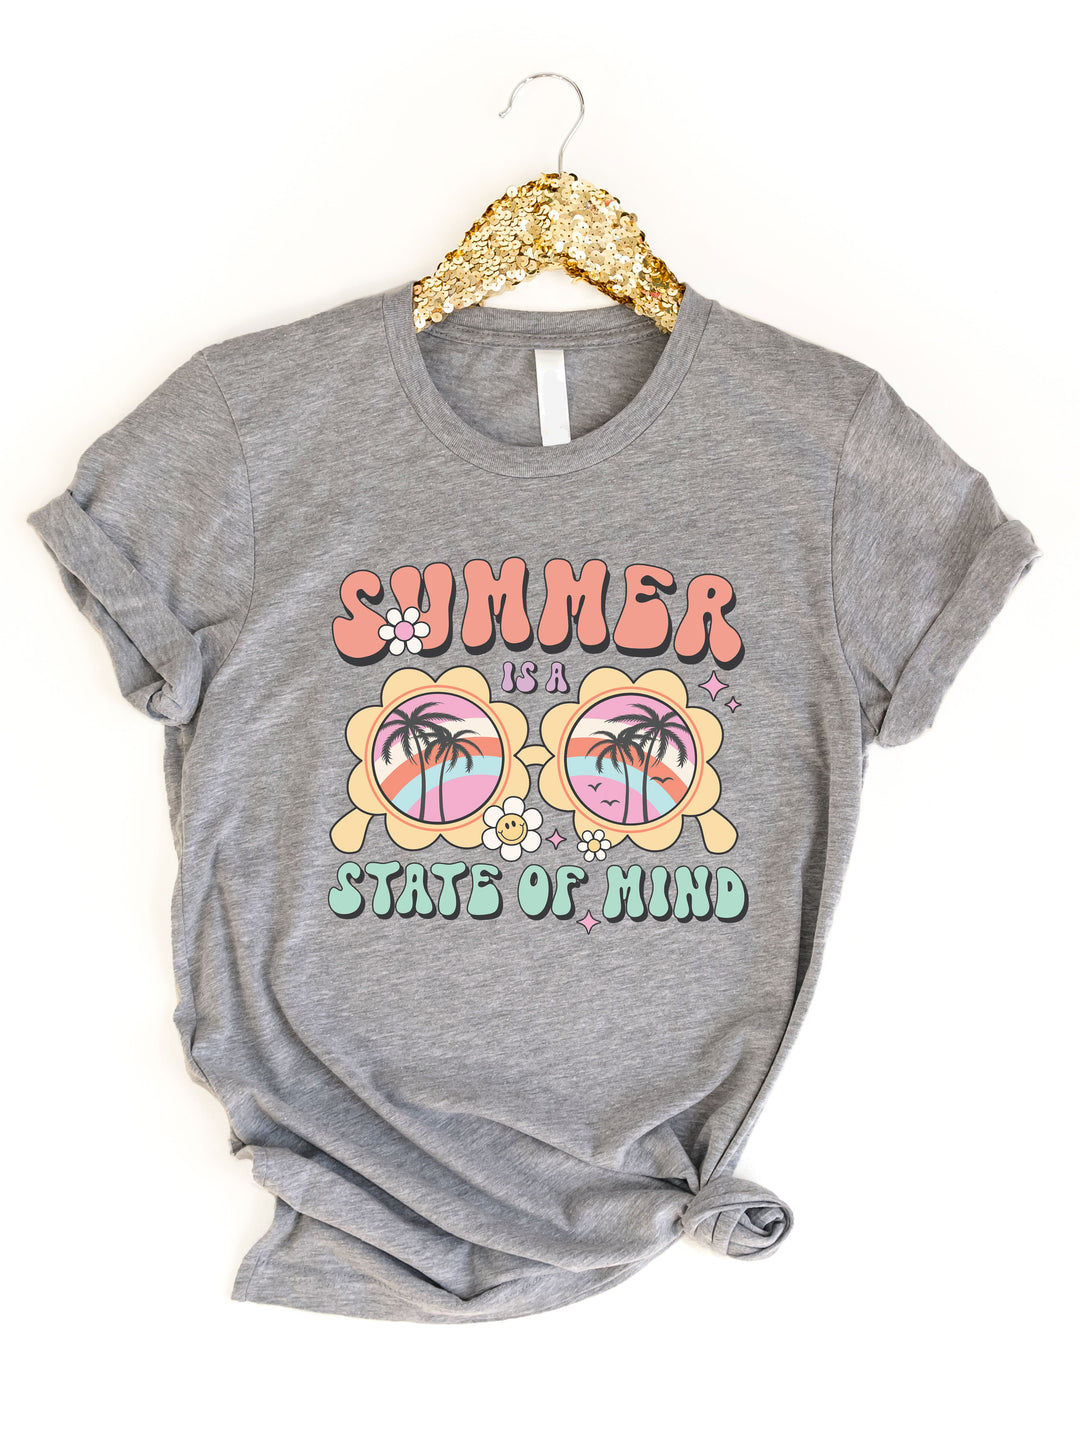 Summer State of Mind Graphic Tee